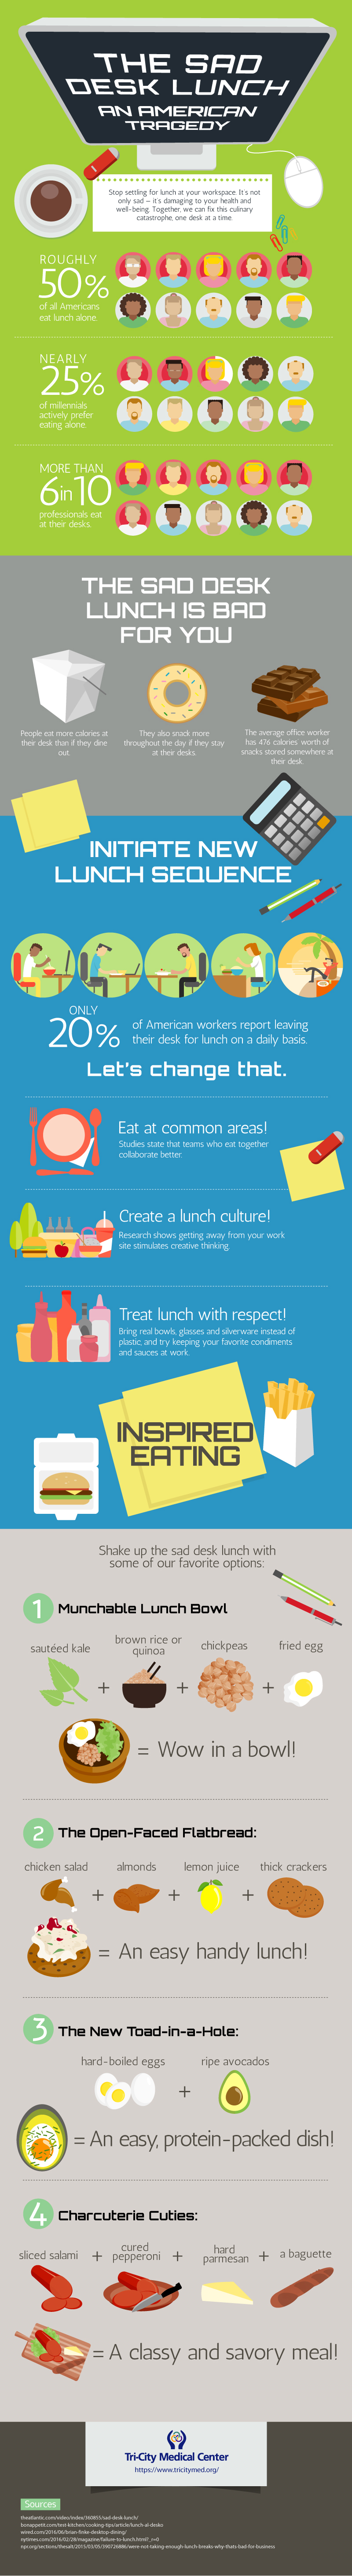 infographic demonstrating how to create a fresh and healthy lunch for work